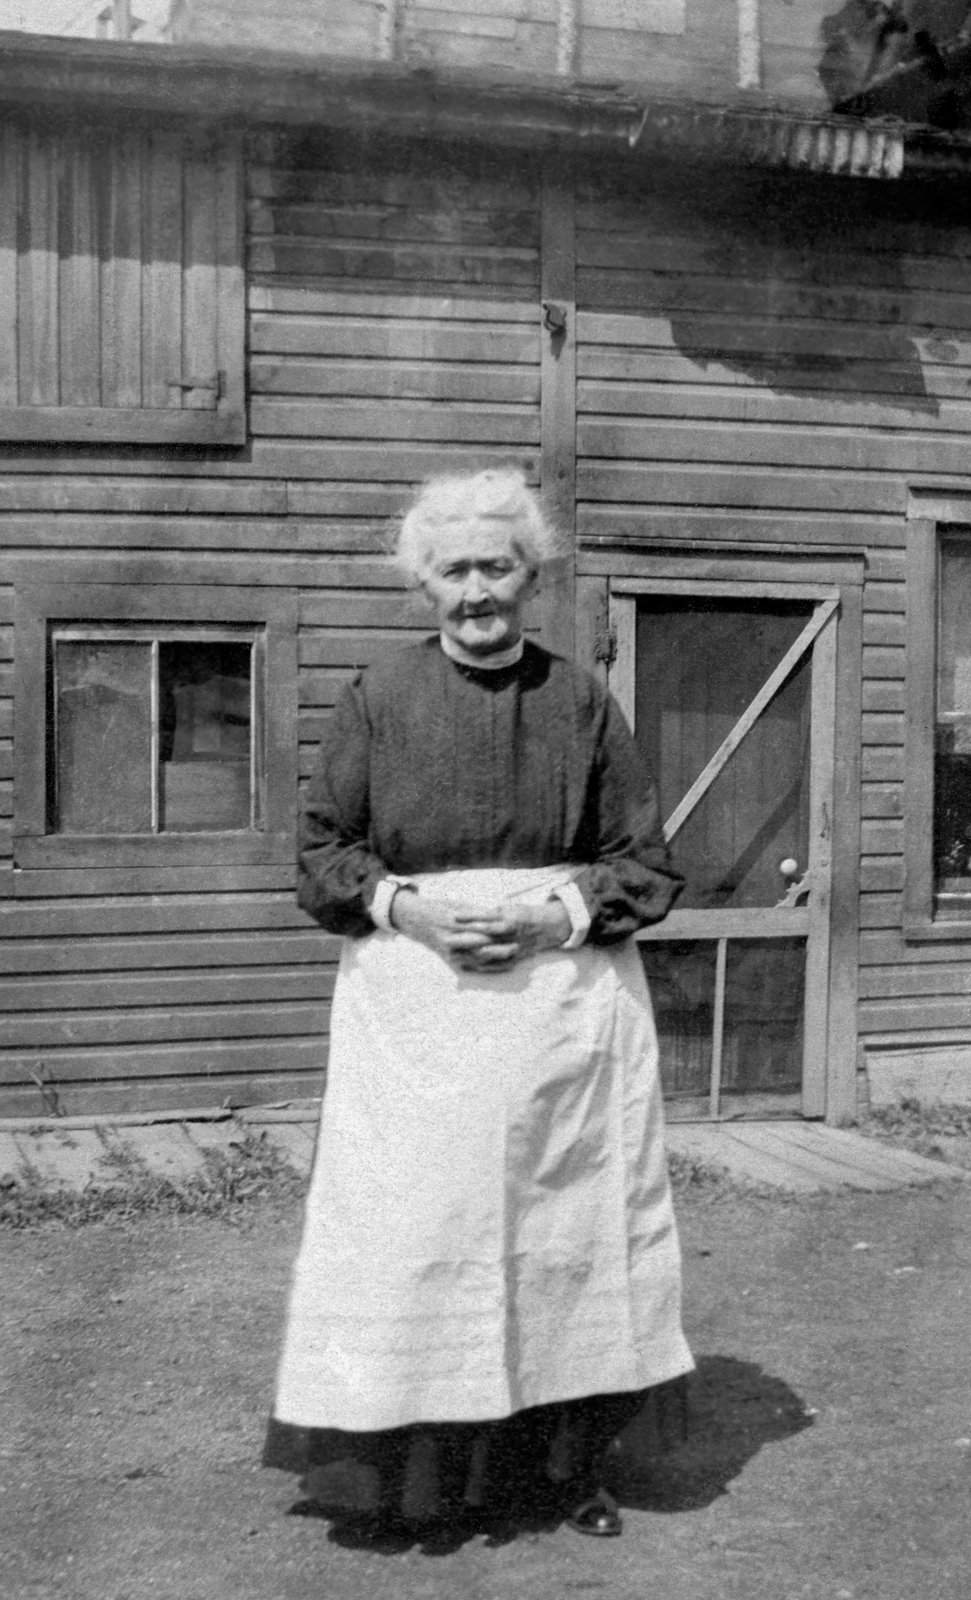 Mary Meagher on the Meagher family farm in Marysville, Tyendinaga Township, Hastings County, Ontario, mid 1910s.